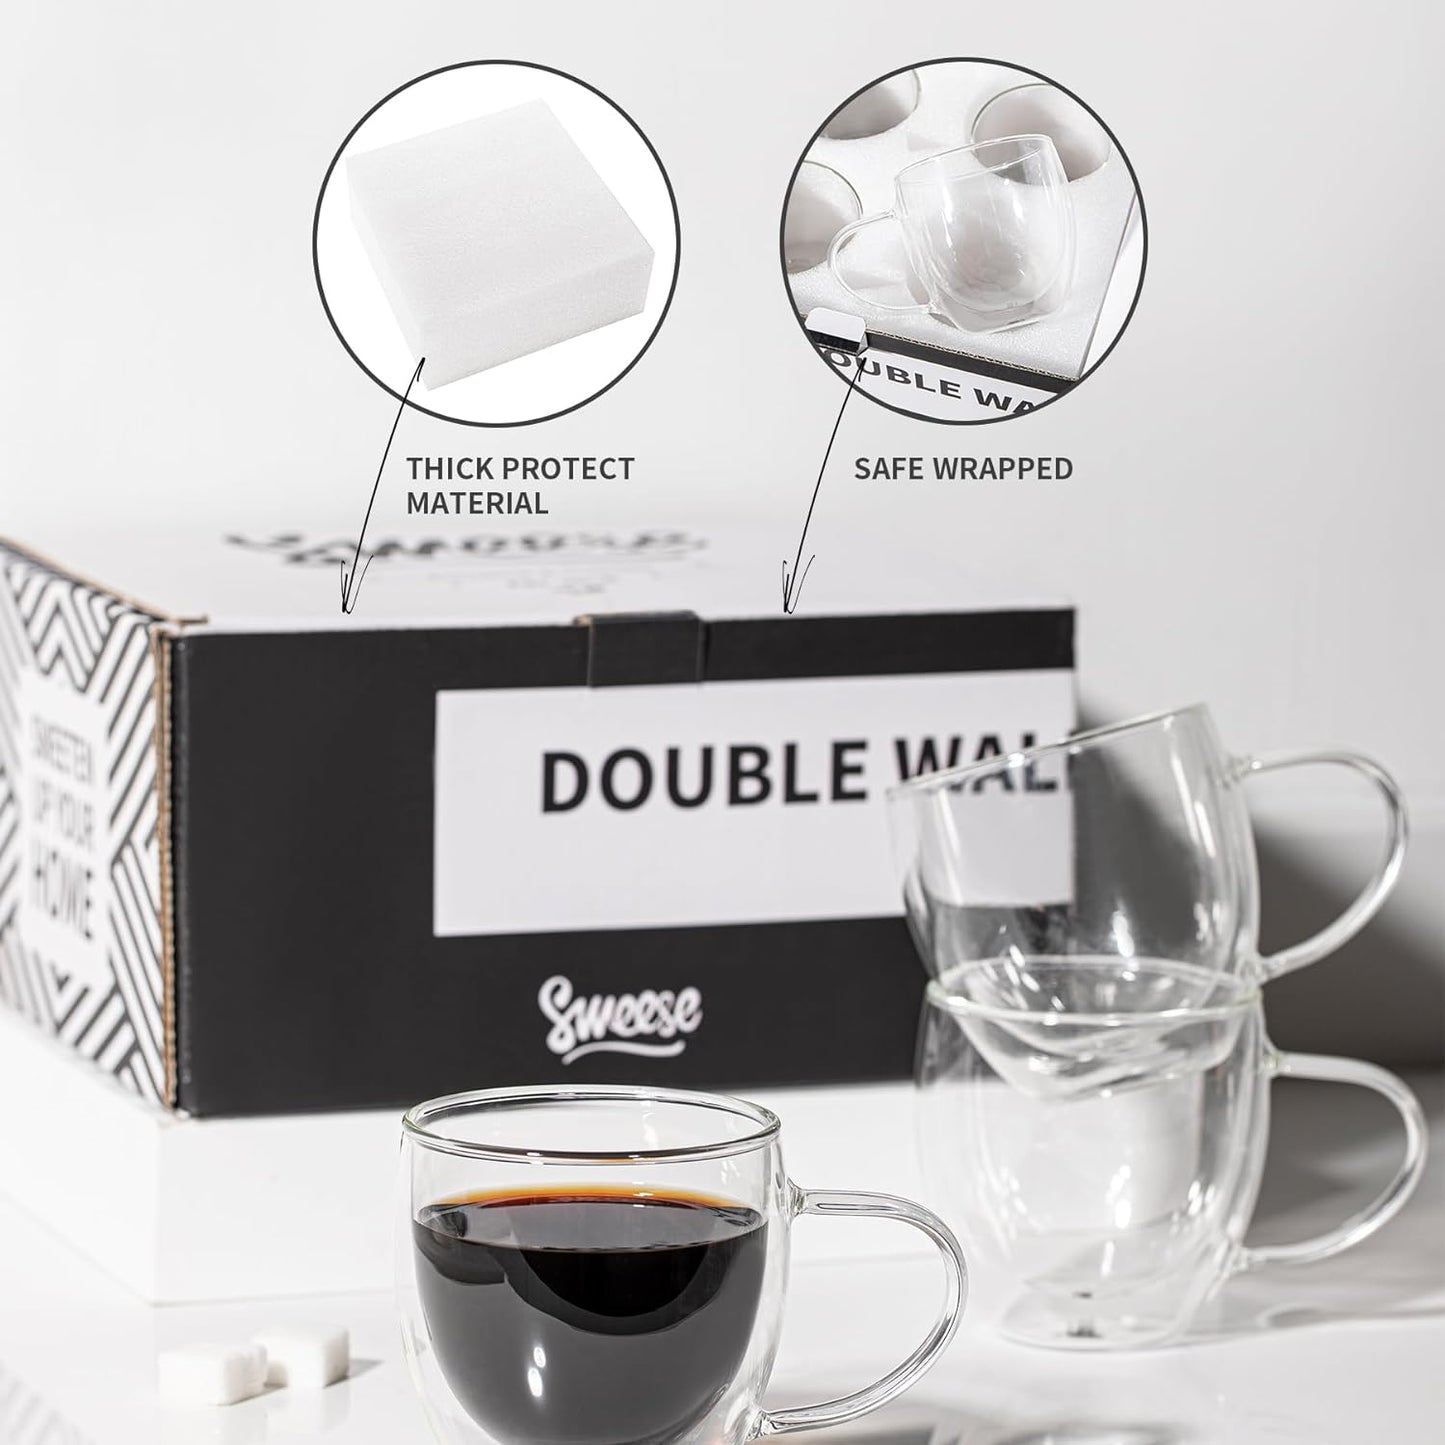 Sweese Clear Coffee Mugs - 8 oz Double Wall Glass Coffee Mugs Set of 4, Perfect for Espresso, Latte, Cappuccino